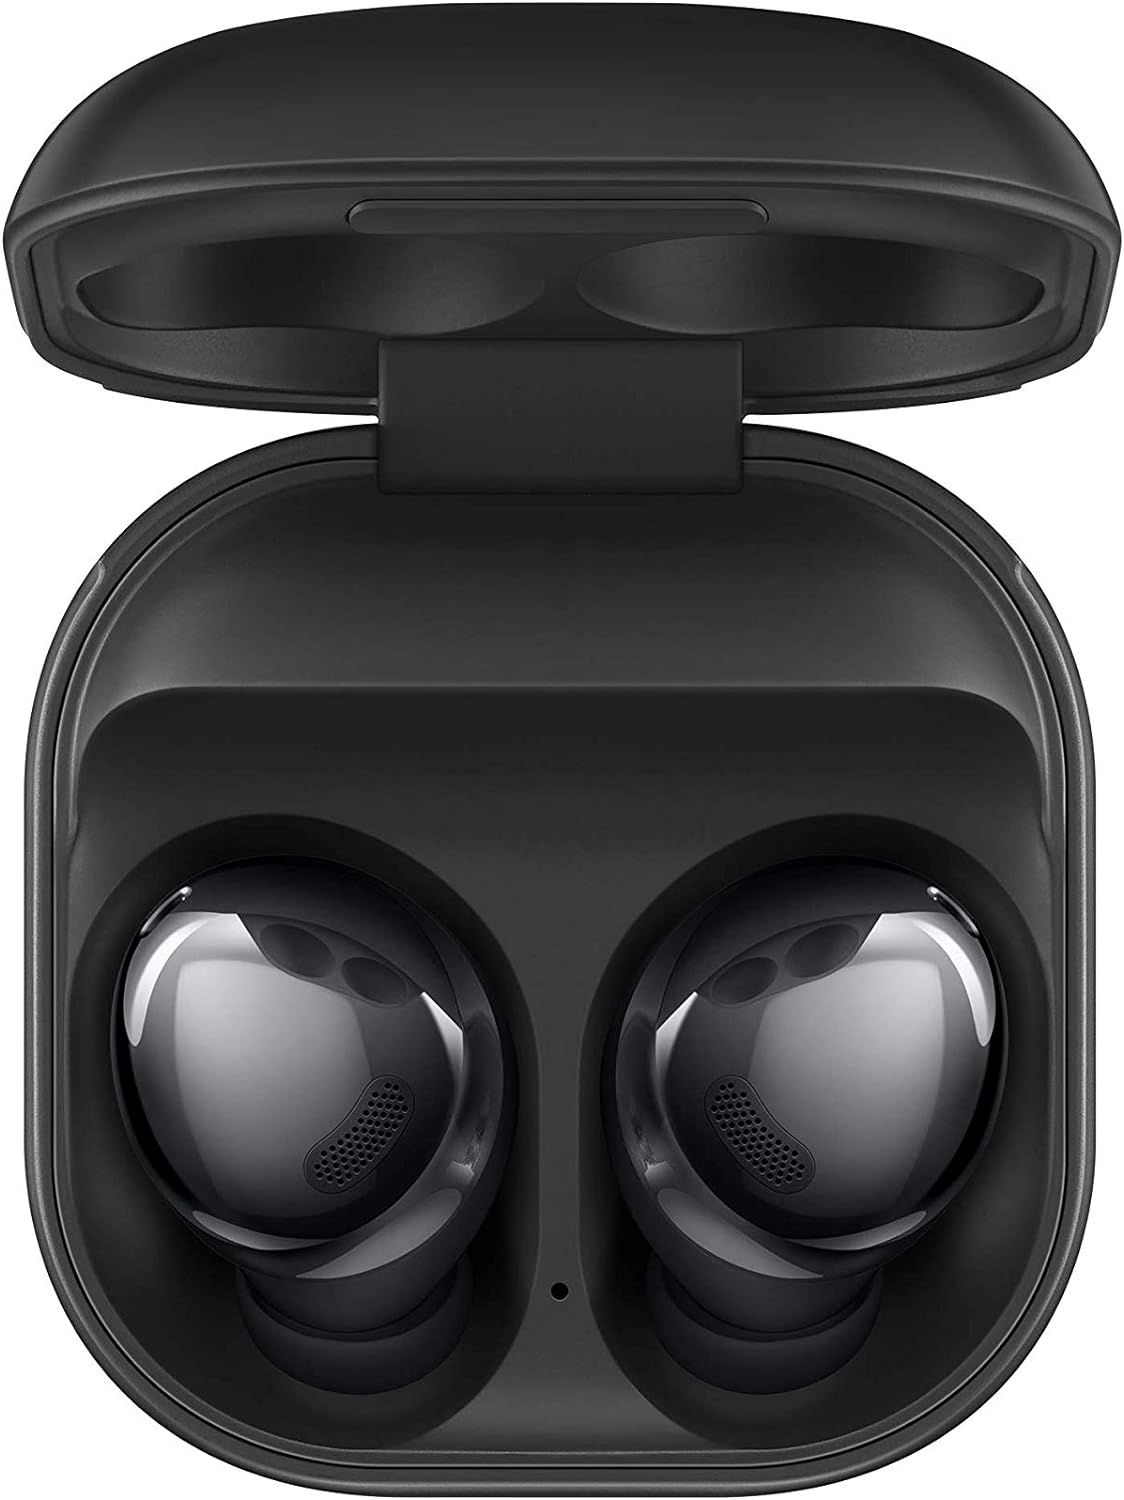 Samsung Galaxy Buds Pro - Enjoy up to 5 hours of playtime with ANC on, extending to 13 hours with the case. 8806092005723